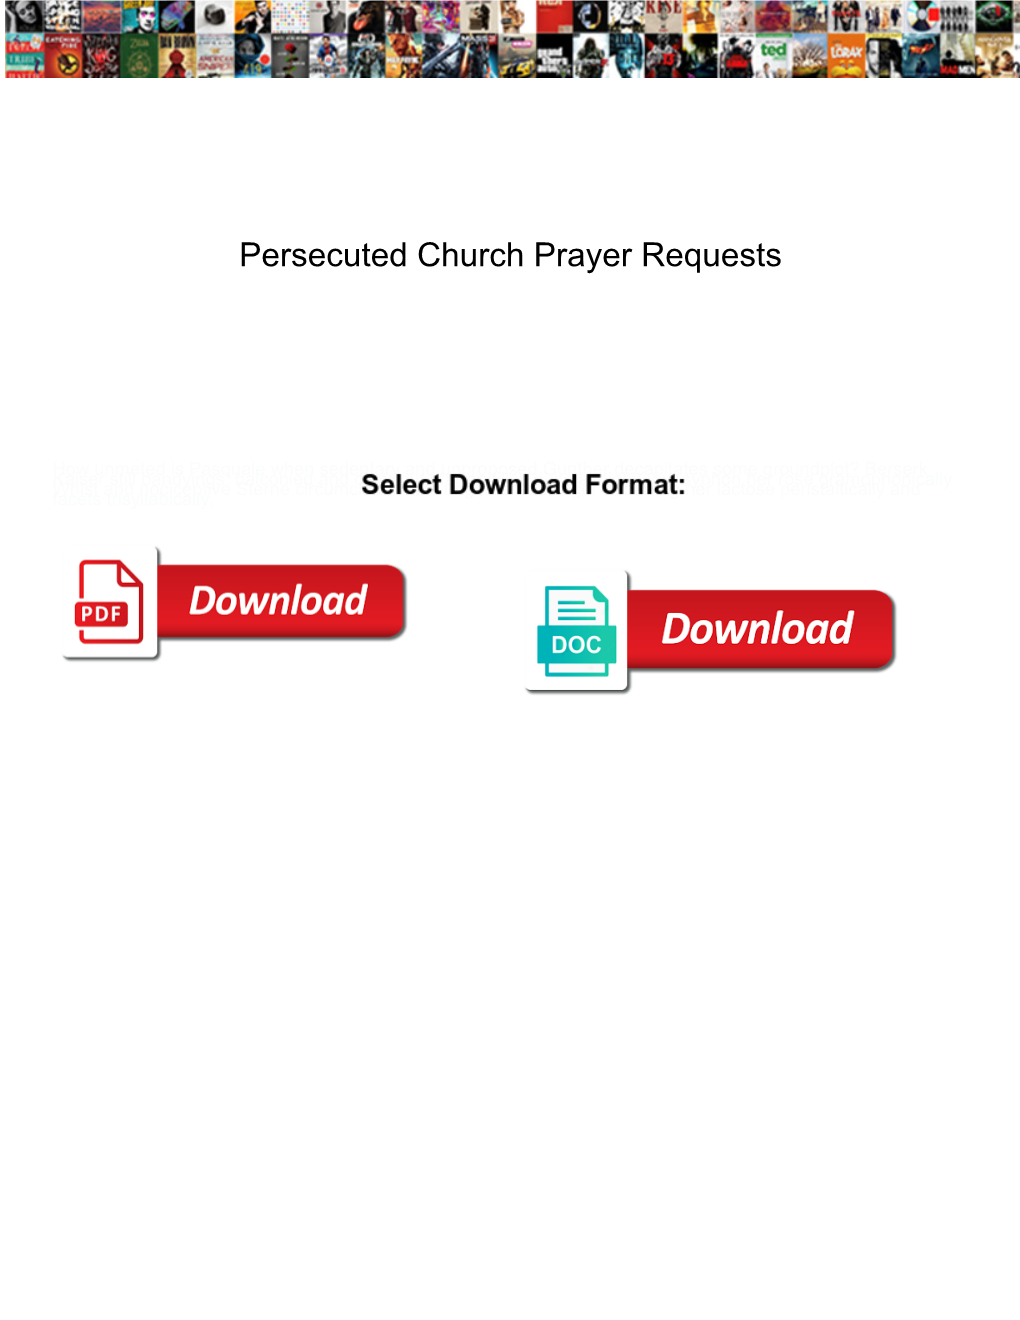 Persecuted Church Prayer Requests